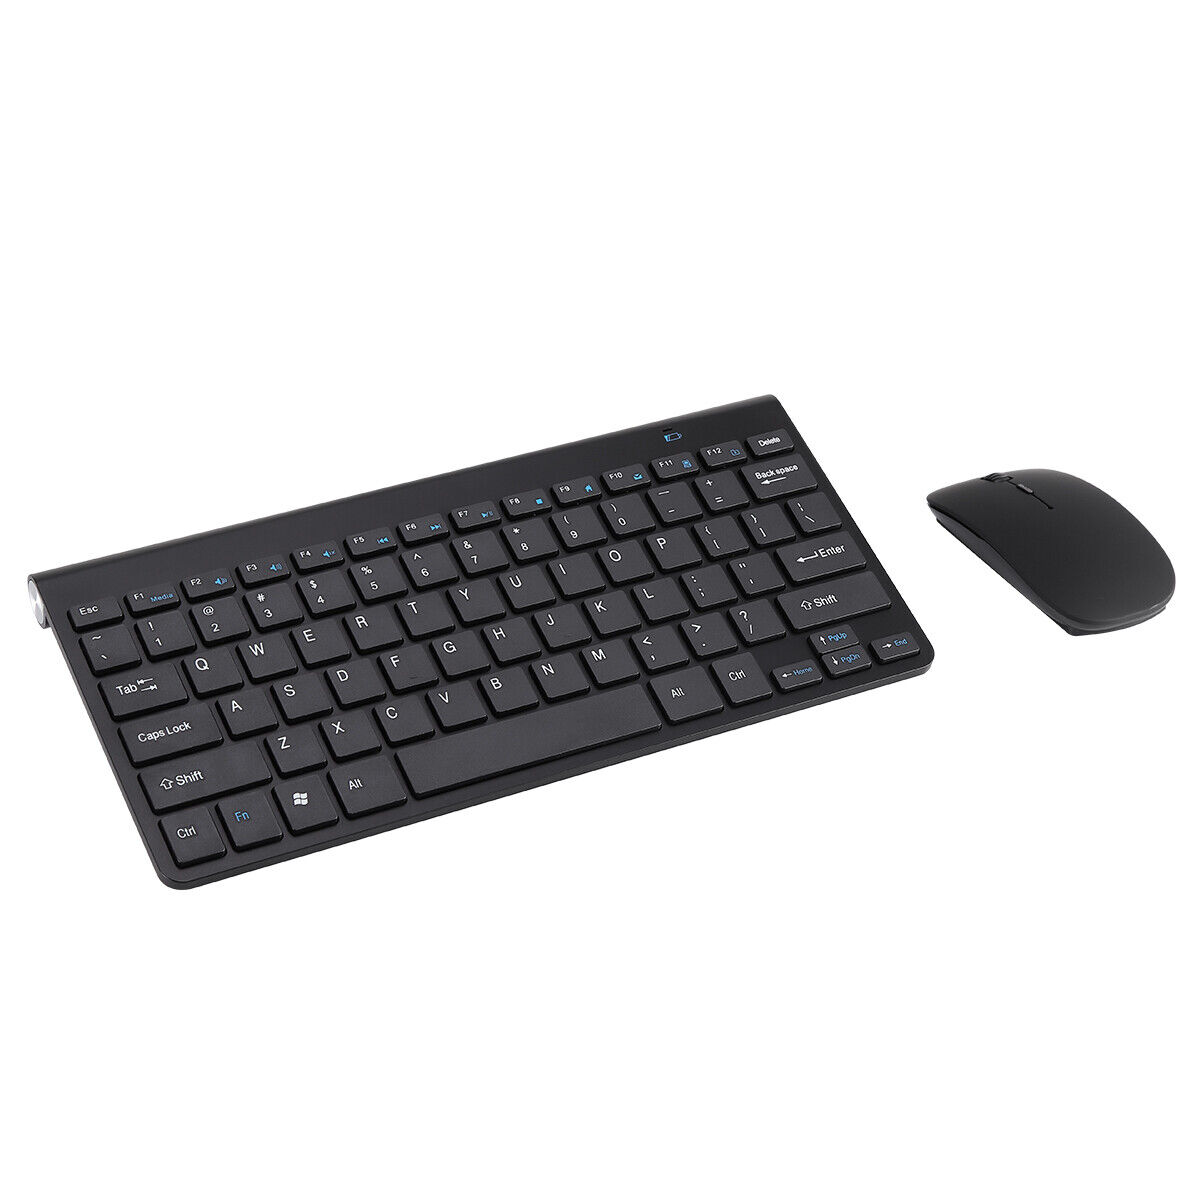 Keyboard And Mouse Set Mini Wireless 2.4G Waterproof For Mac Apple PC Computer